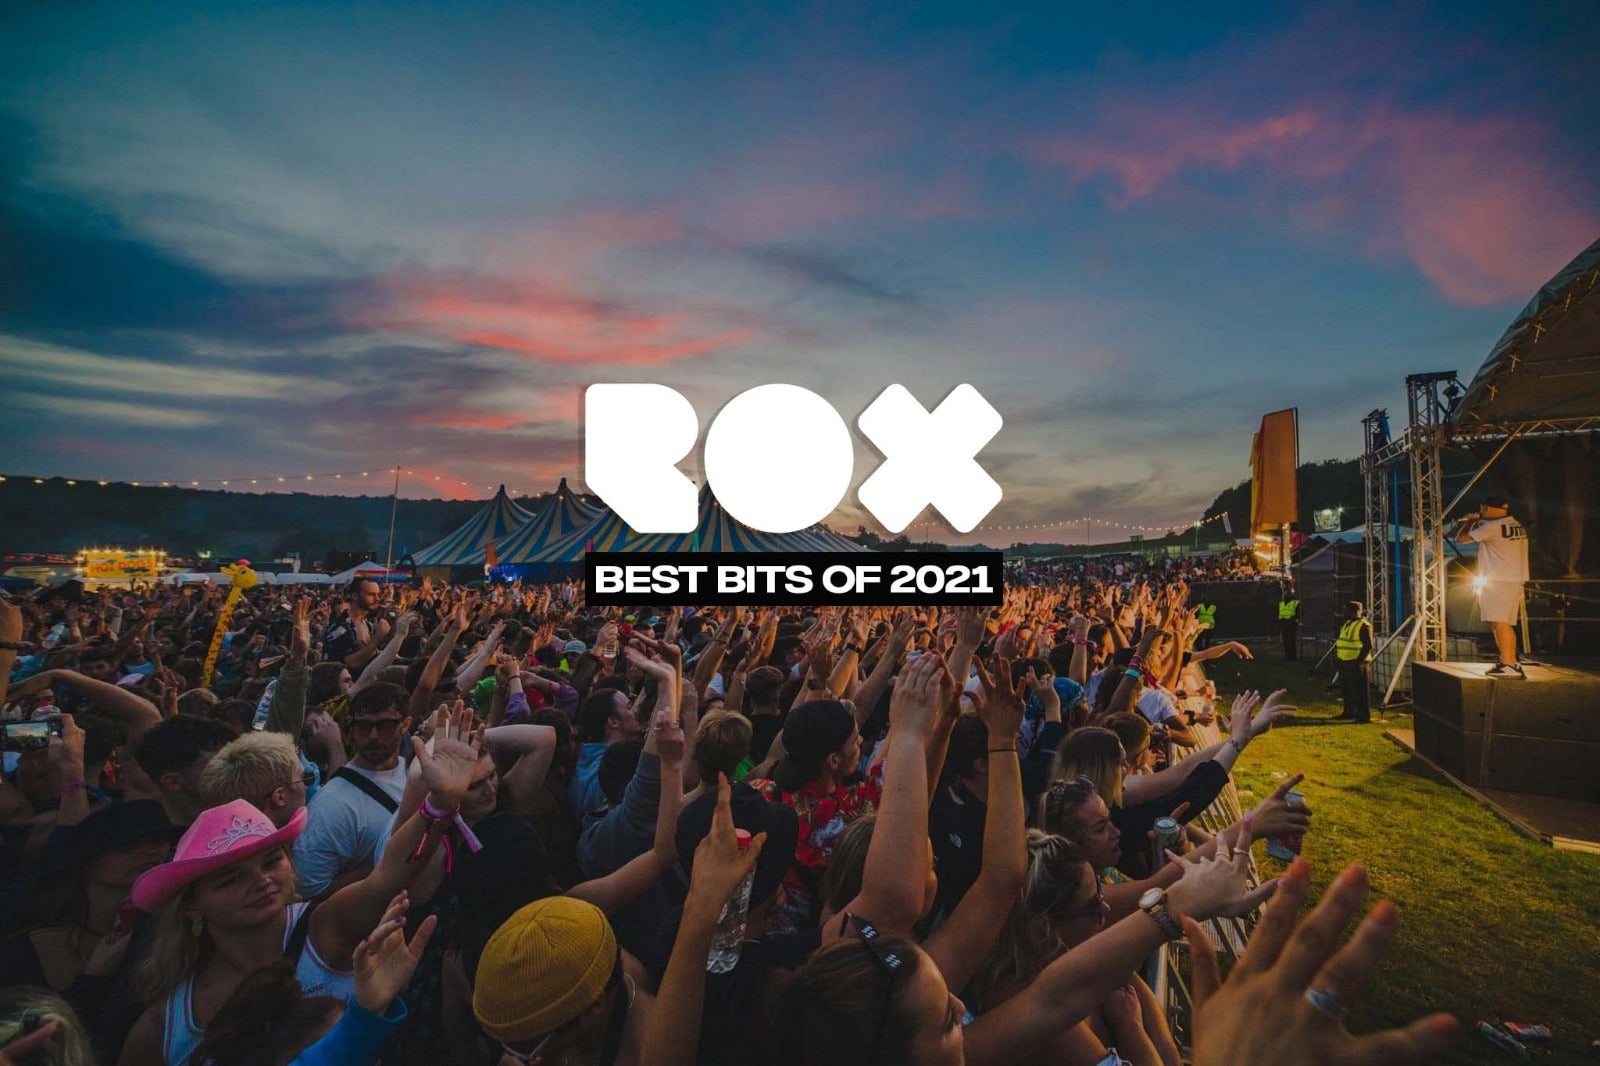 The Best of Rox 2021